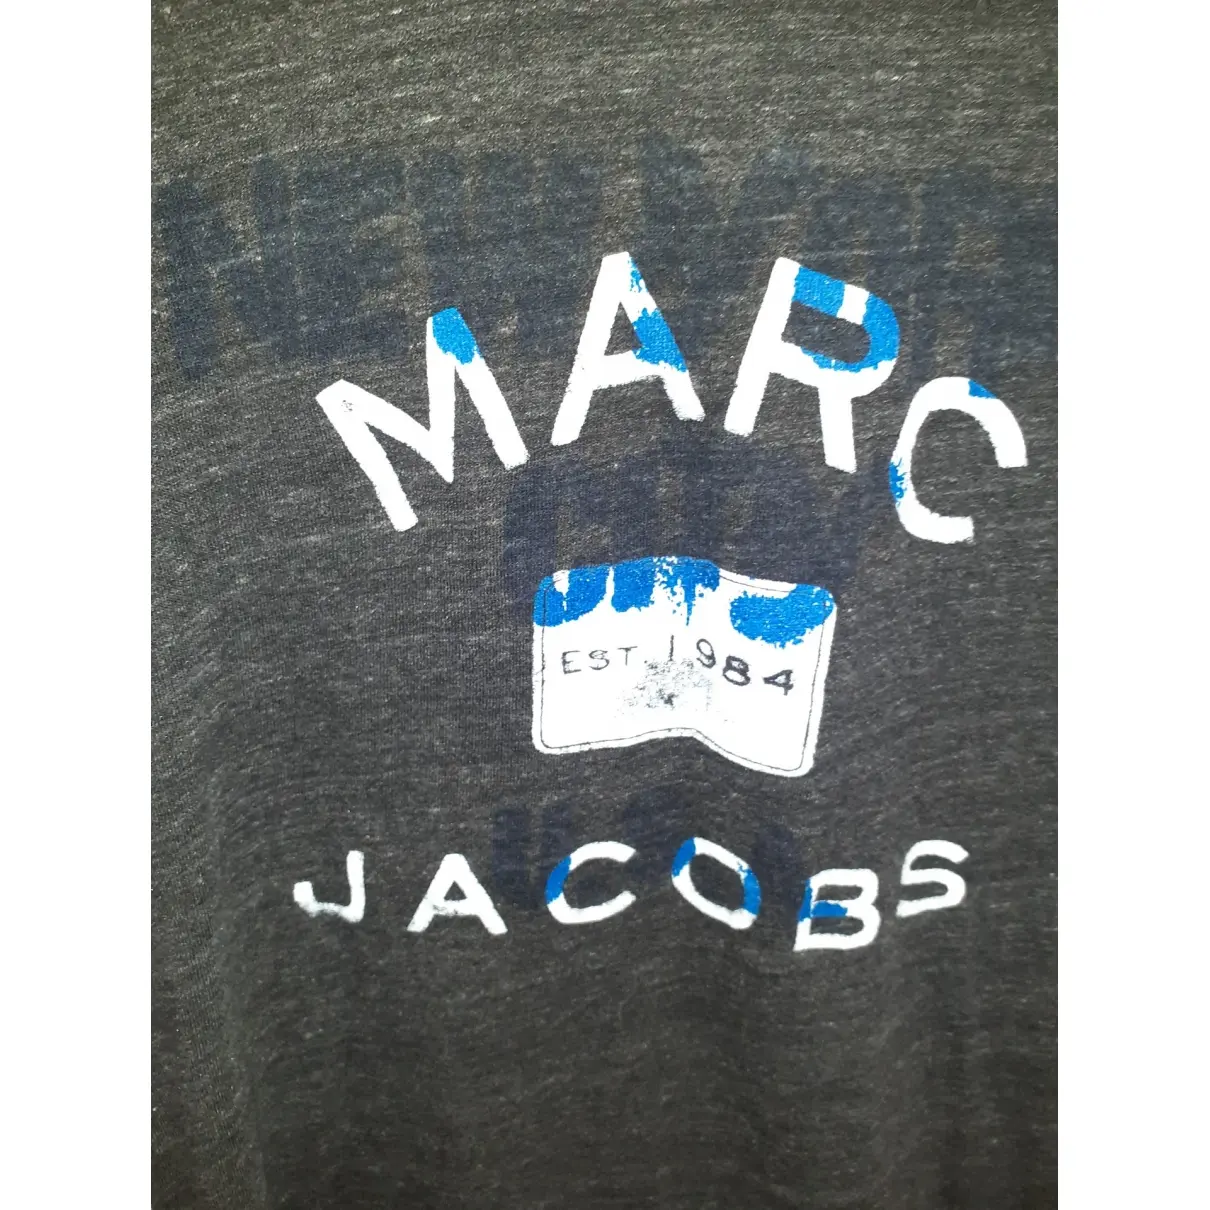 Buy Marc by Marc Jacobs T-shirt online